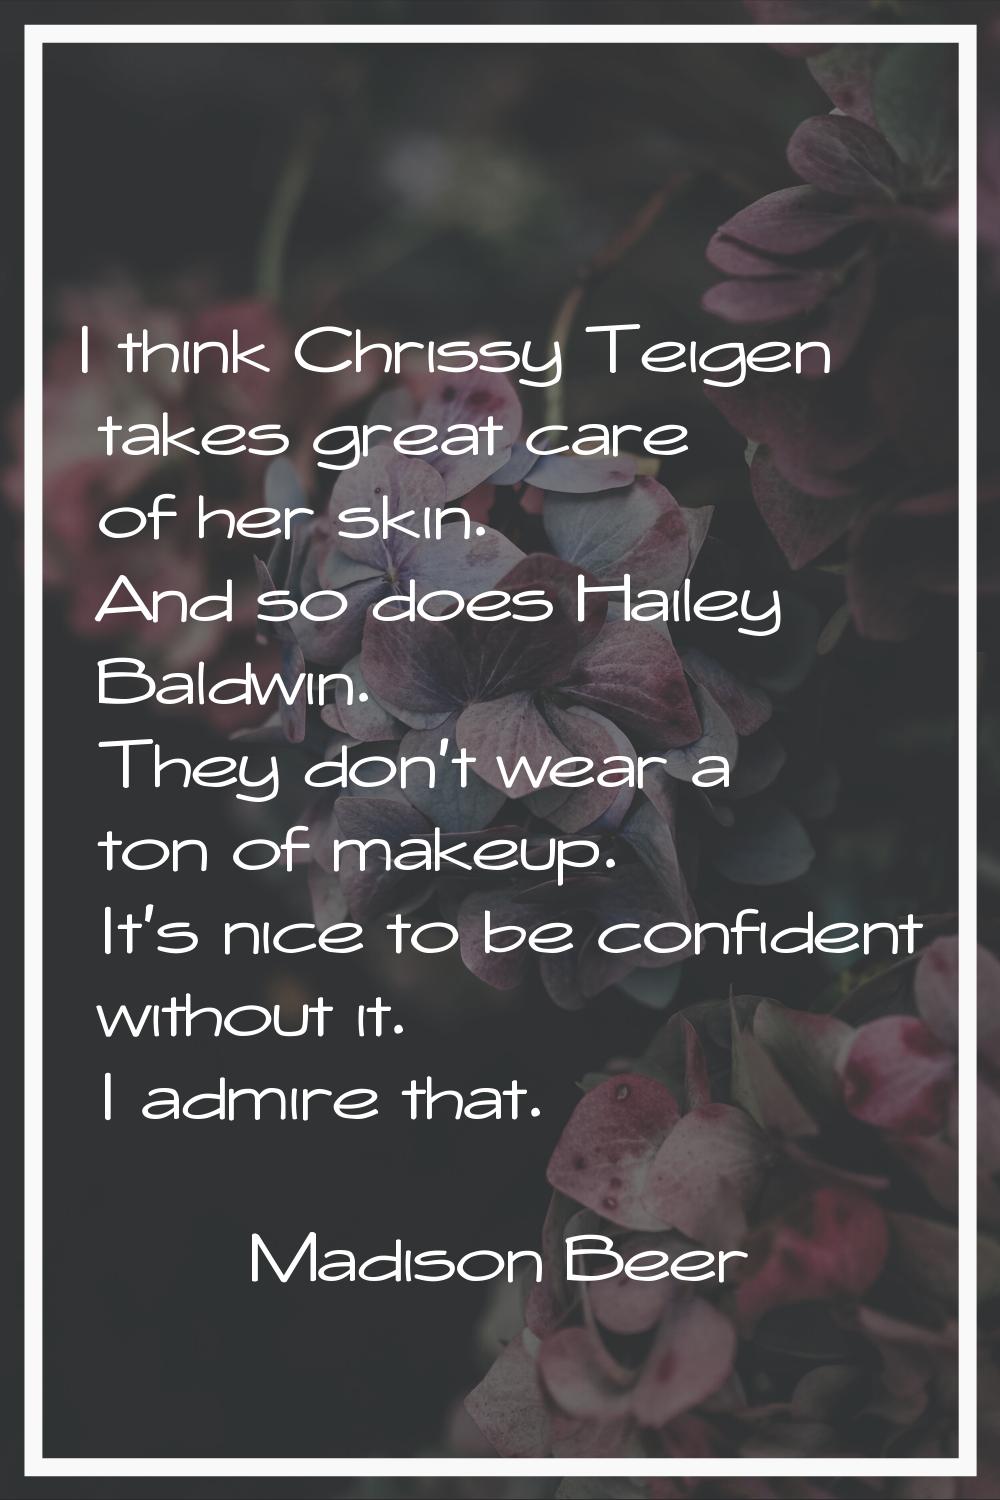 I think Chrissy Teigen takes great care of her skin. And so does Hailey Baldwin. They don't wear a 